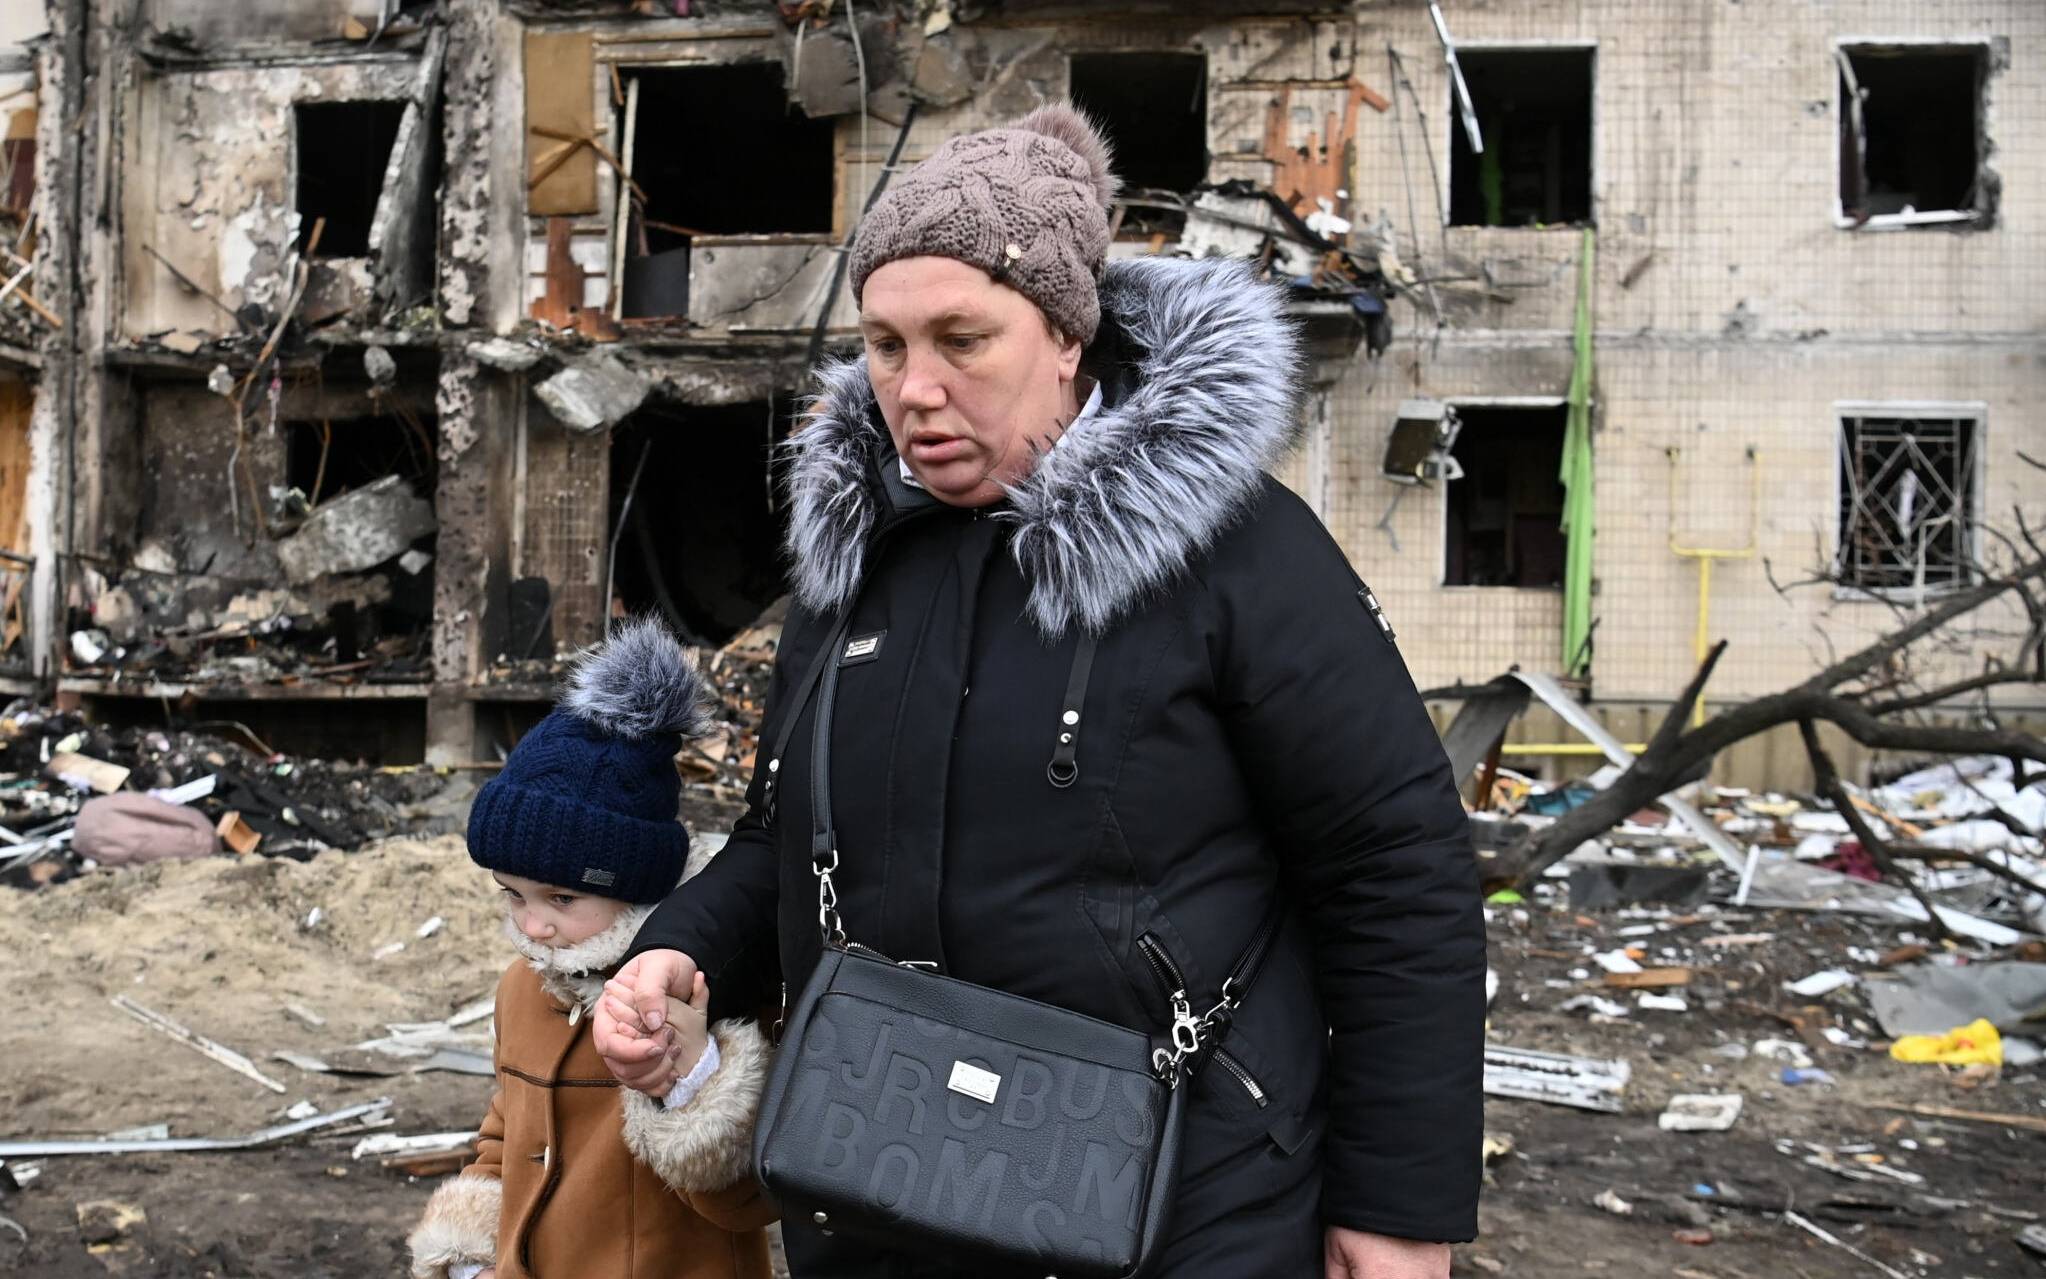 A woman with a child walks in front of a damaged residential building at Koshytsa Street, a suburb of the Ukrainian capital Kyiv, where a military shell allegedly hit, on February 25, 2022. - Russian forces reached the outskirts of Kyiv on Friday as Ukrainian President Volodymyr Zelensky said the invading troops were targeting civilians and explosions could be heard in the besieged capital. Pre-dawn blasts in Kyiv set off a second day of violence after Russian President Vladimir Putin defied Western warnings to unleash a full-scale ground invasion and air assault on Thursday that quickly claimed dozens of lives and displaced at least 100,000 people. (Photo by Daniel LEAL / AFP)